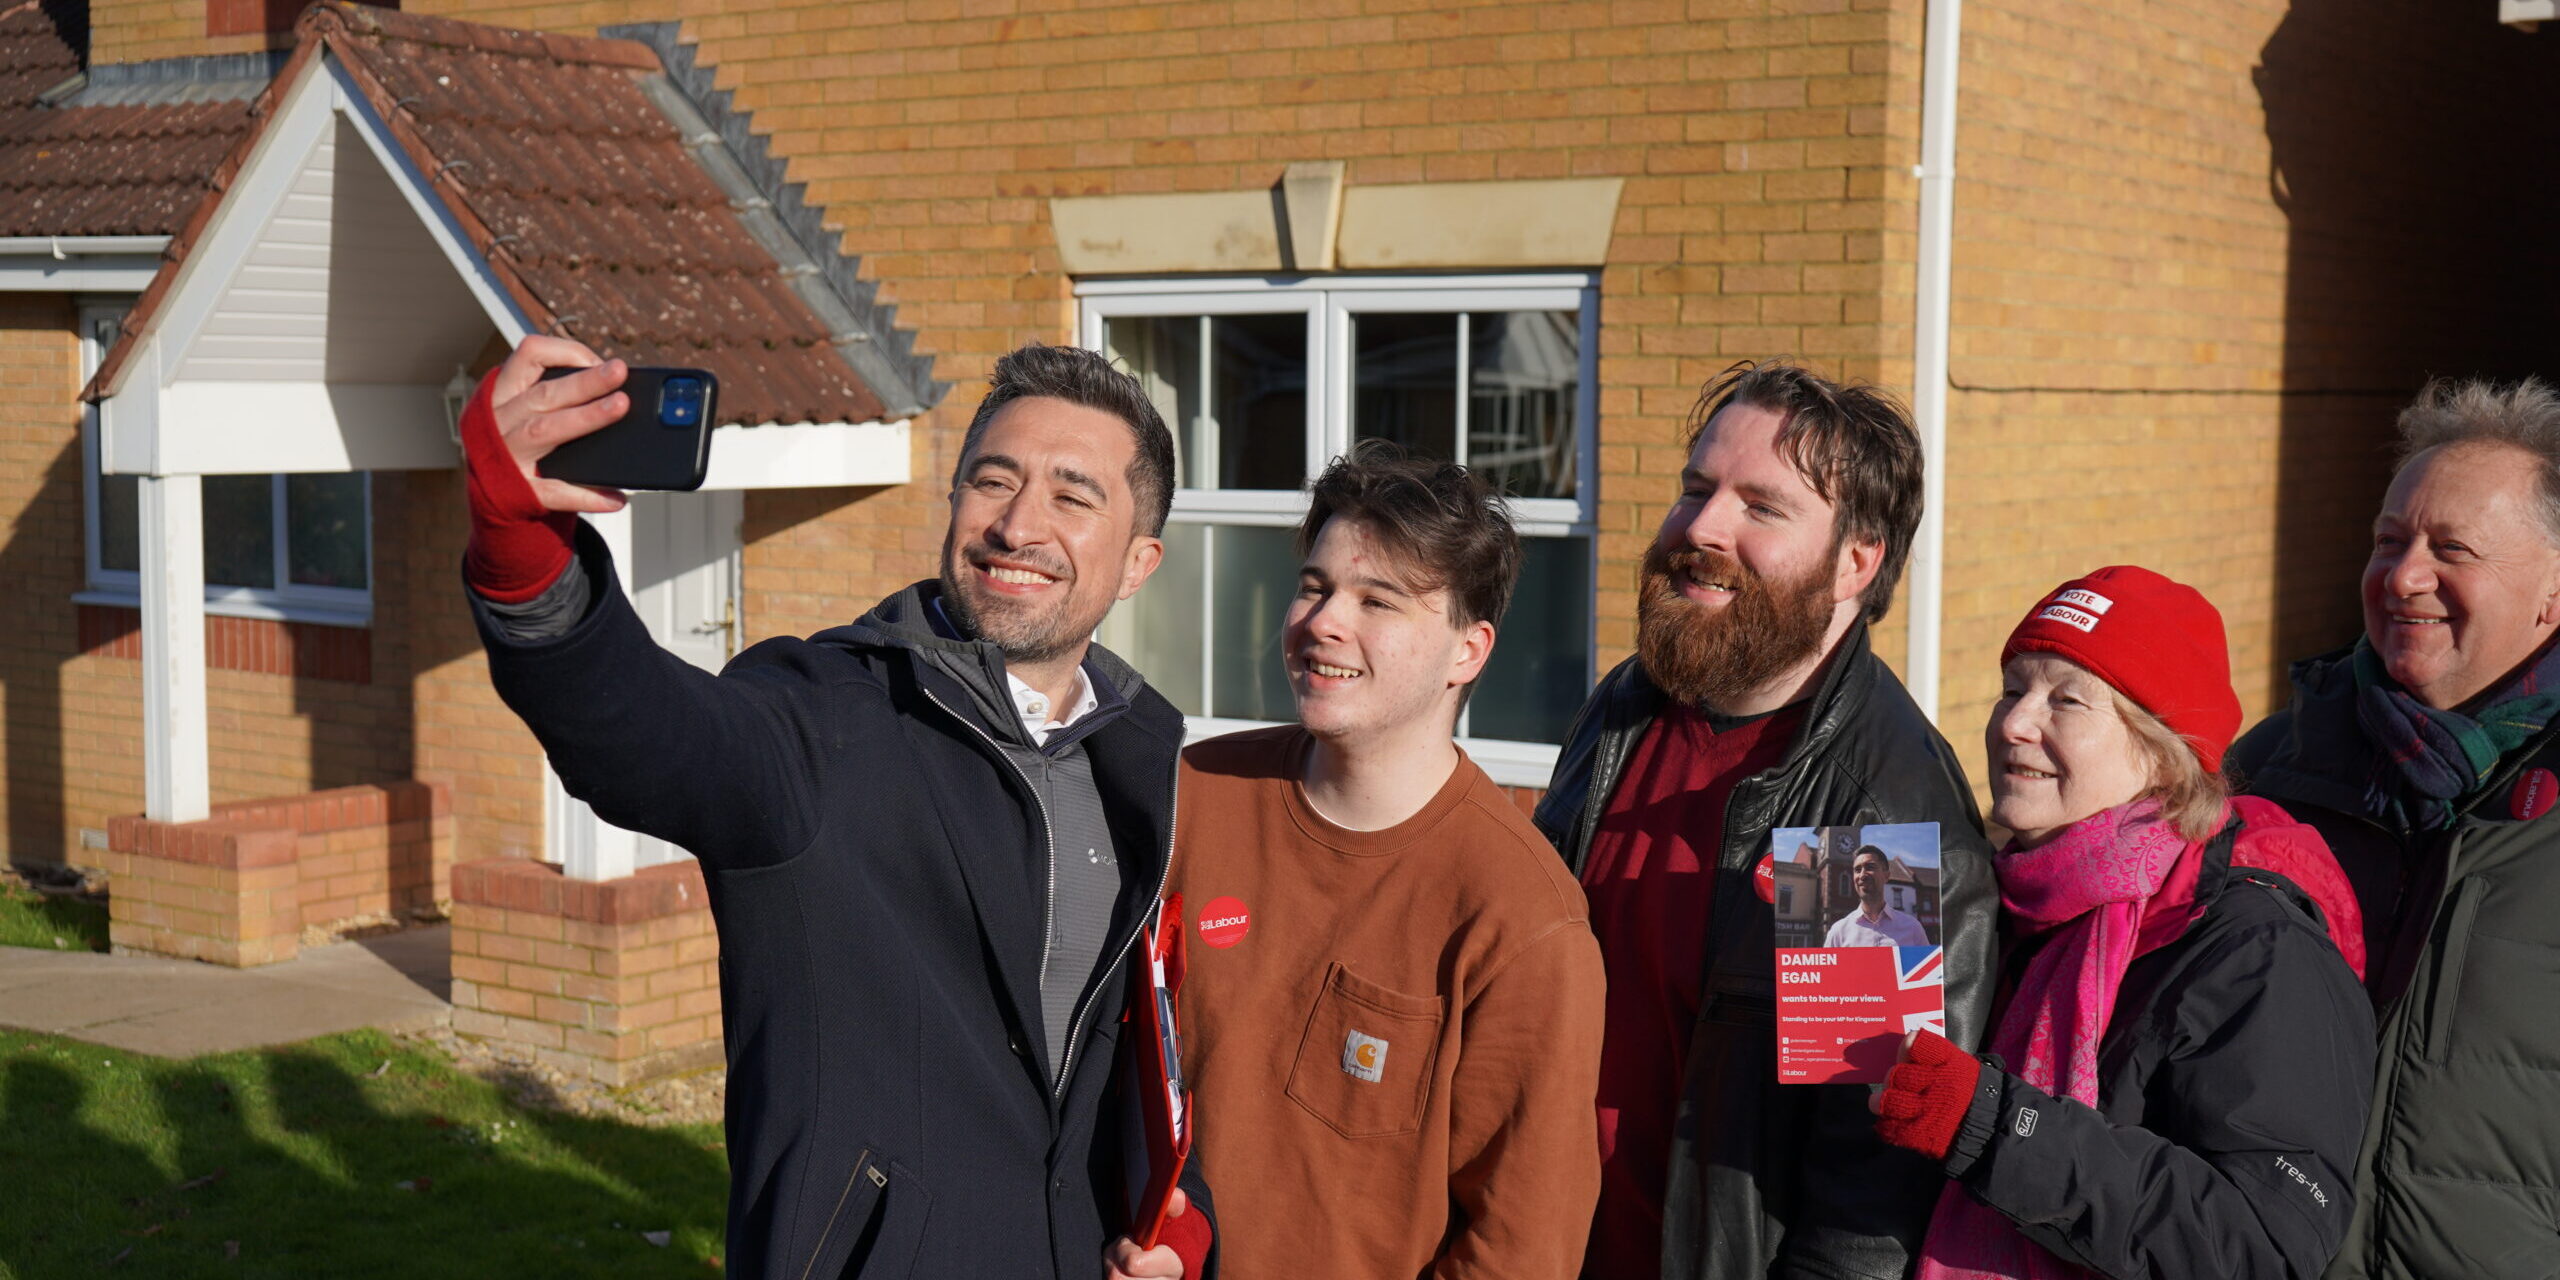 Labour candidate in Kingswood Damien Egan taking a selfie with four Labour campaigners